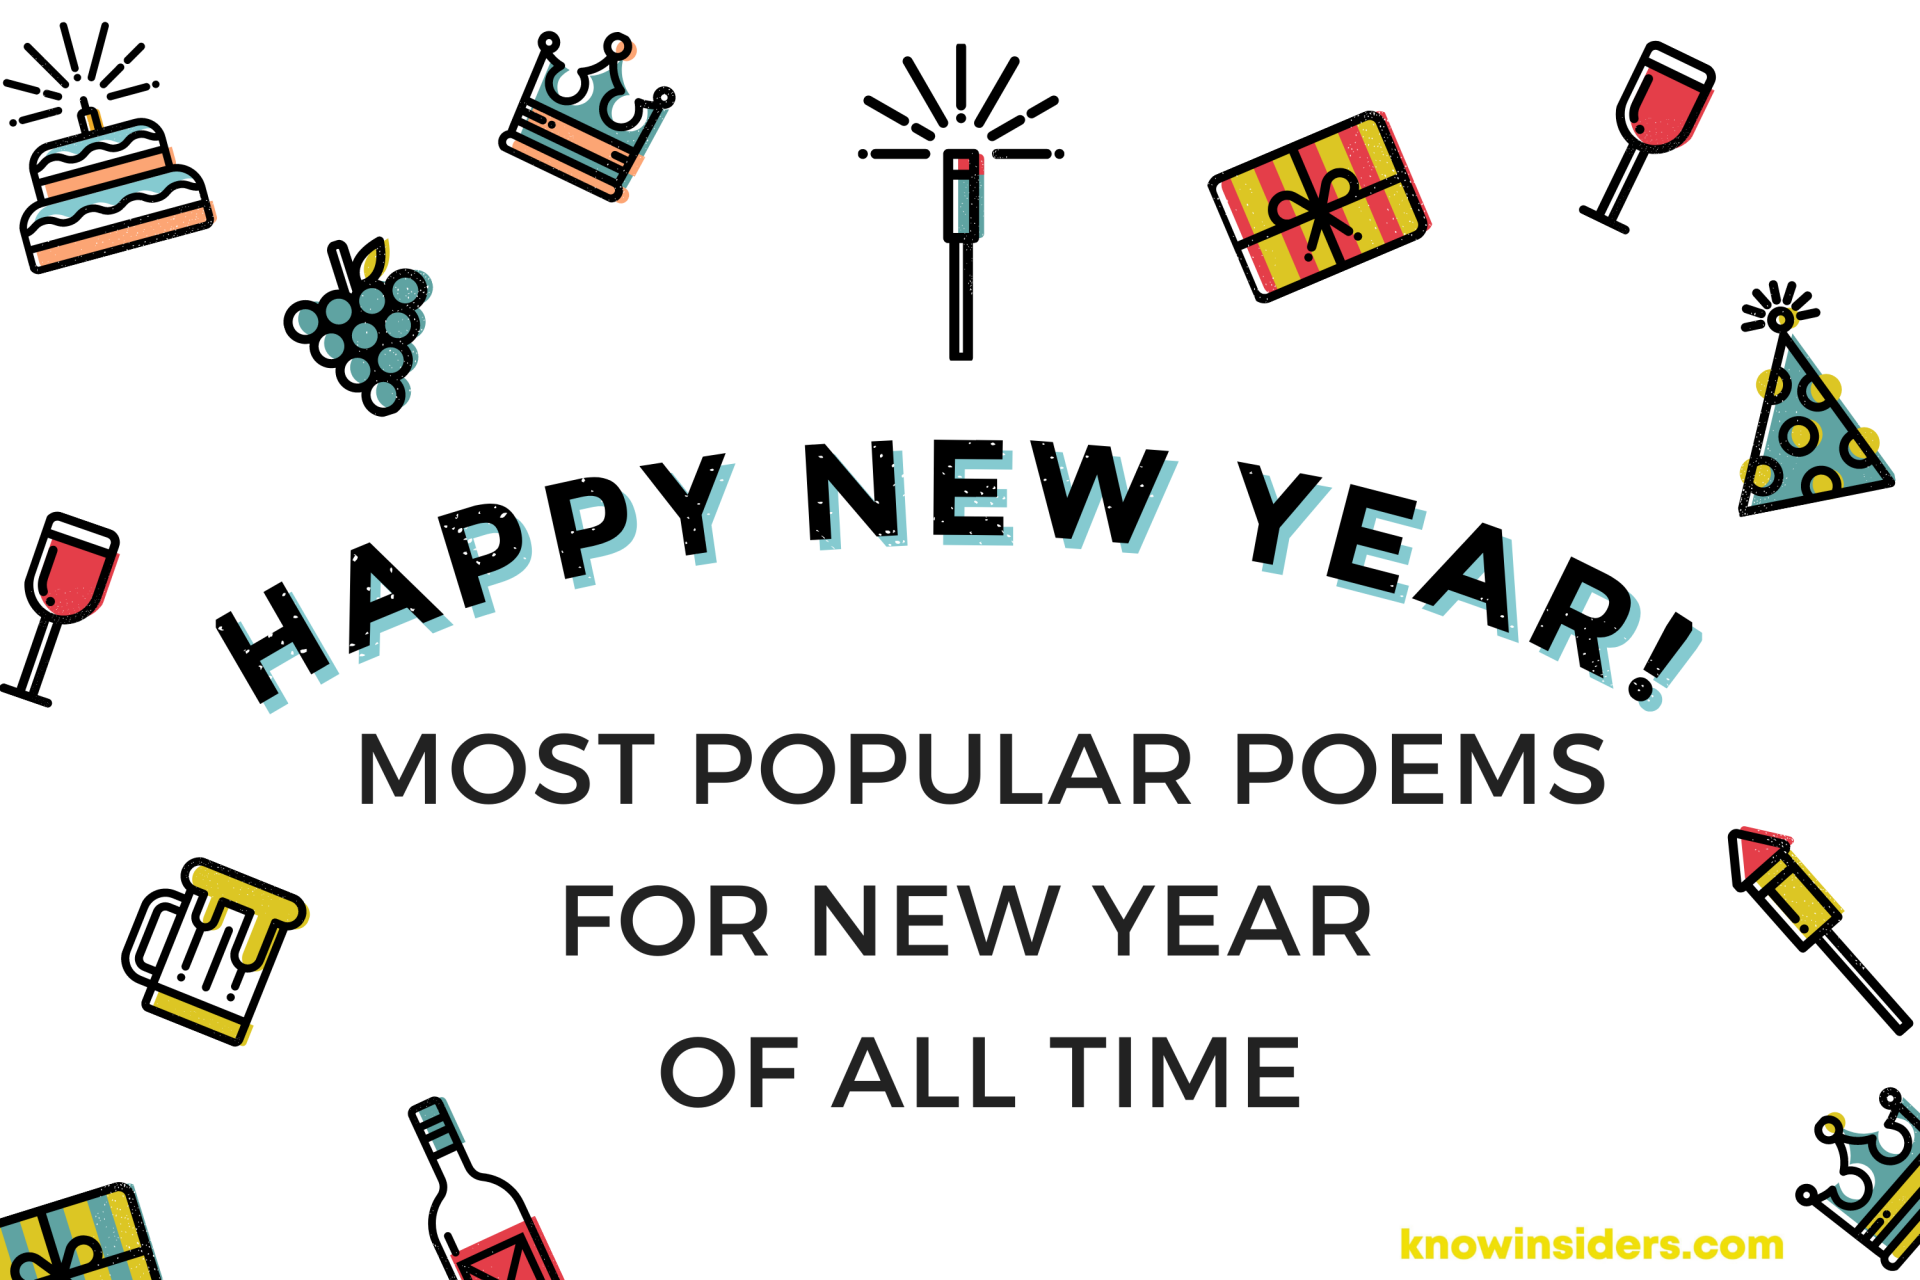 Top 15 Most Popular Poems For New Year Of All Time